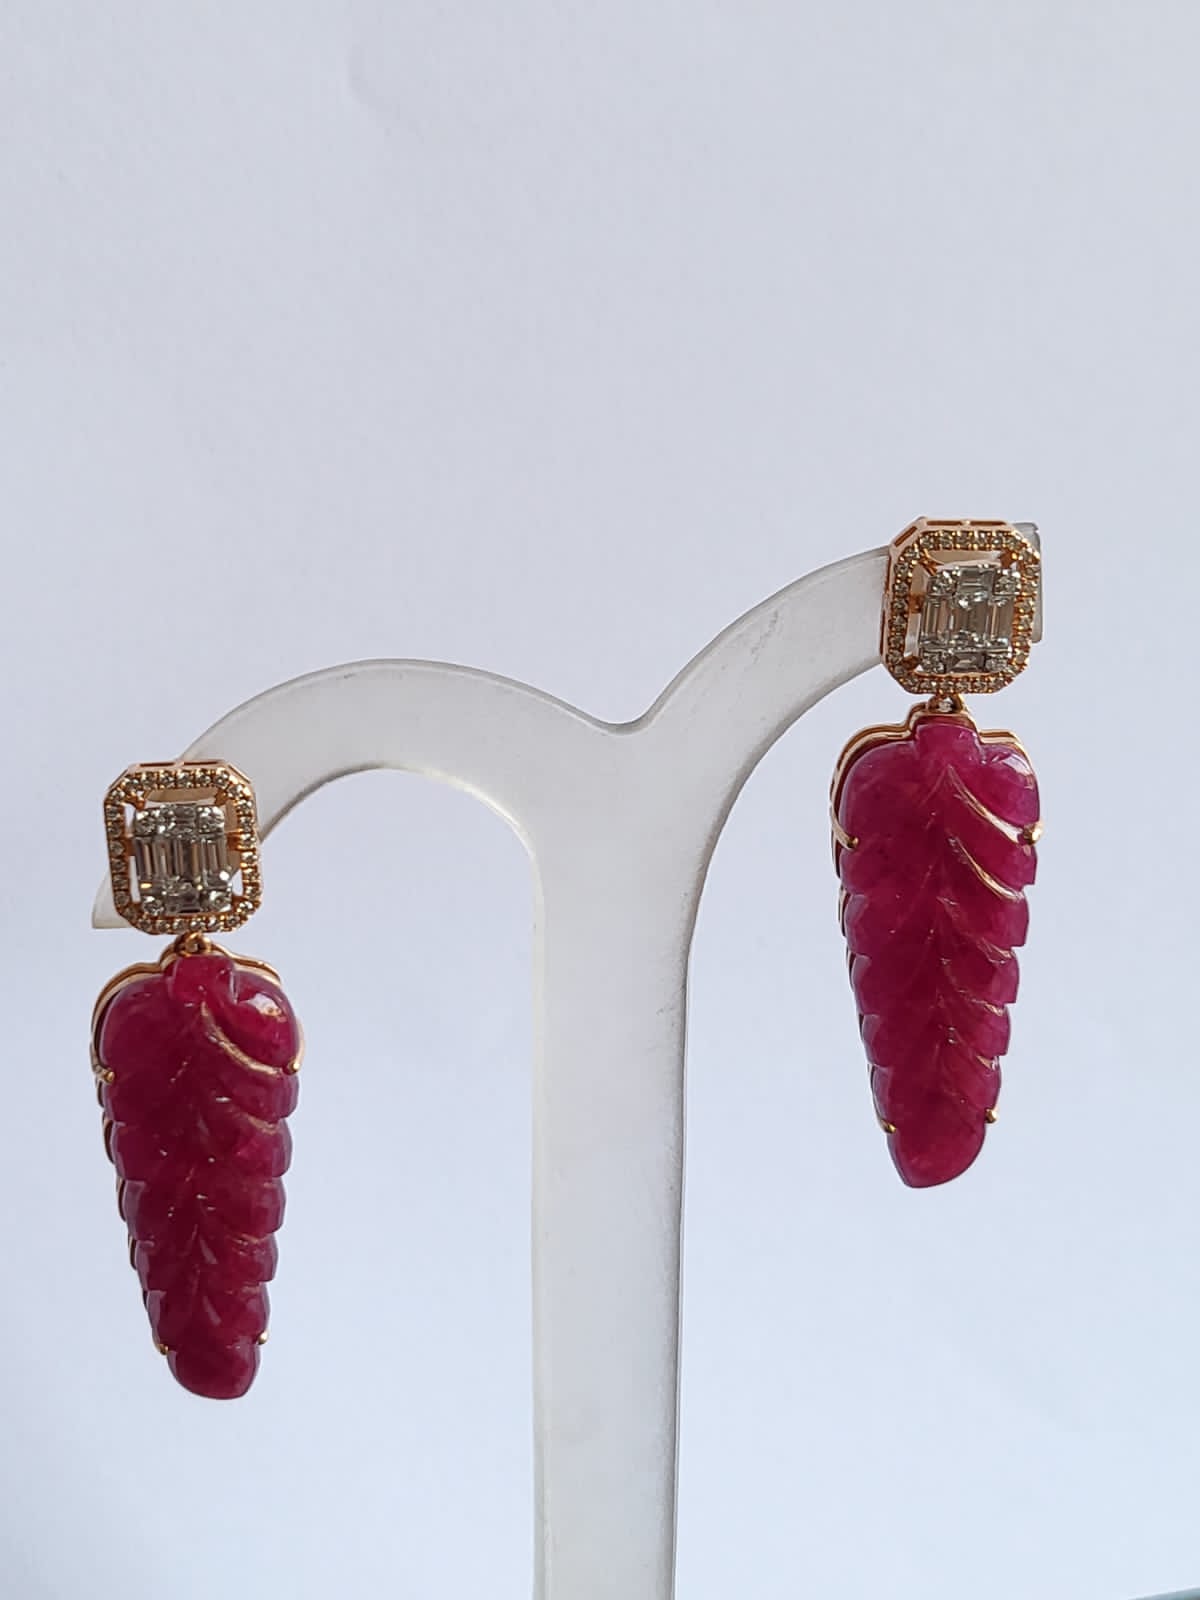 A very gorgeous and one of a kind, carved Ruby Chandelier Earrings set in 18K Rose Gold & Diamonds. The weight of the carved Ruby is 44.65 carats. The Ruby is completely natural, without any treatment and is of Mozambique origin. The Ruby is